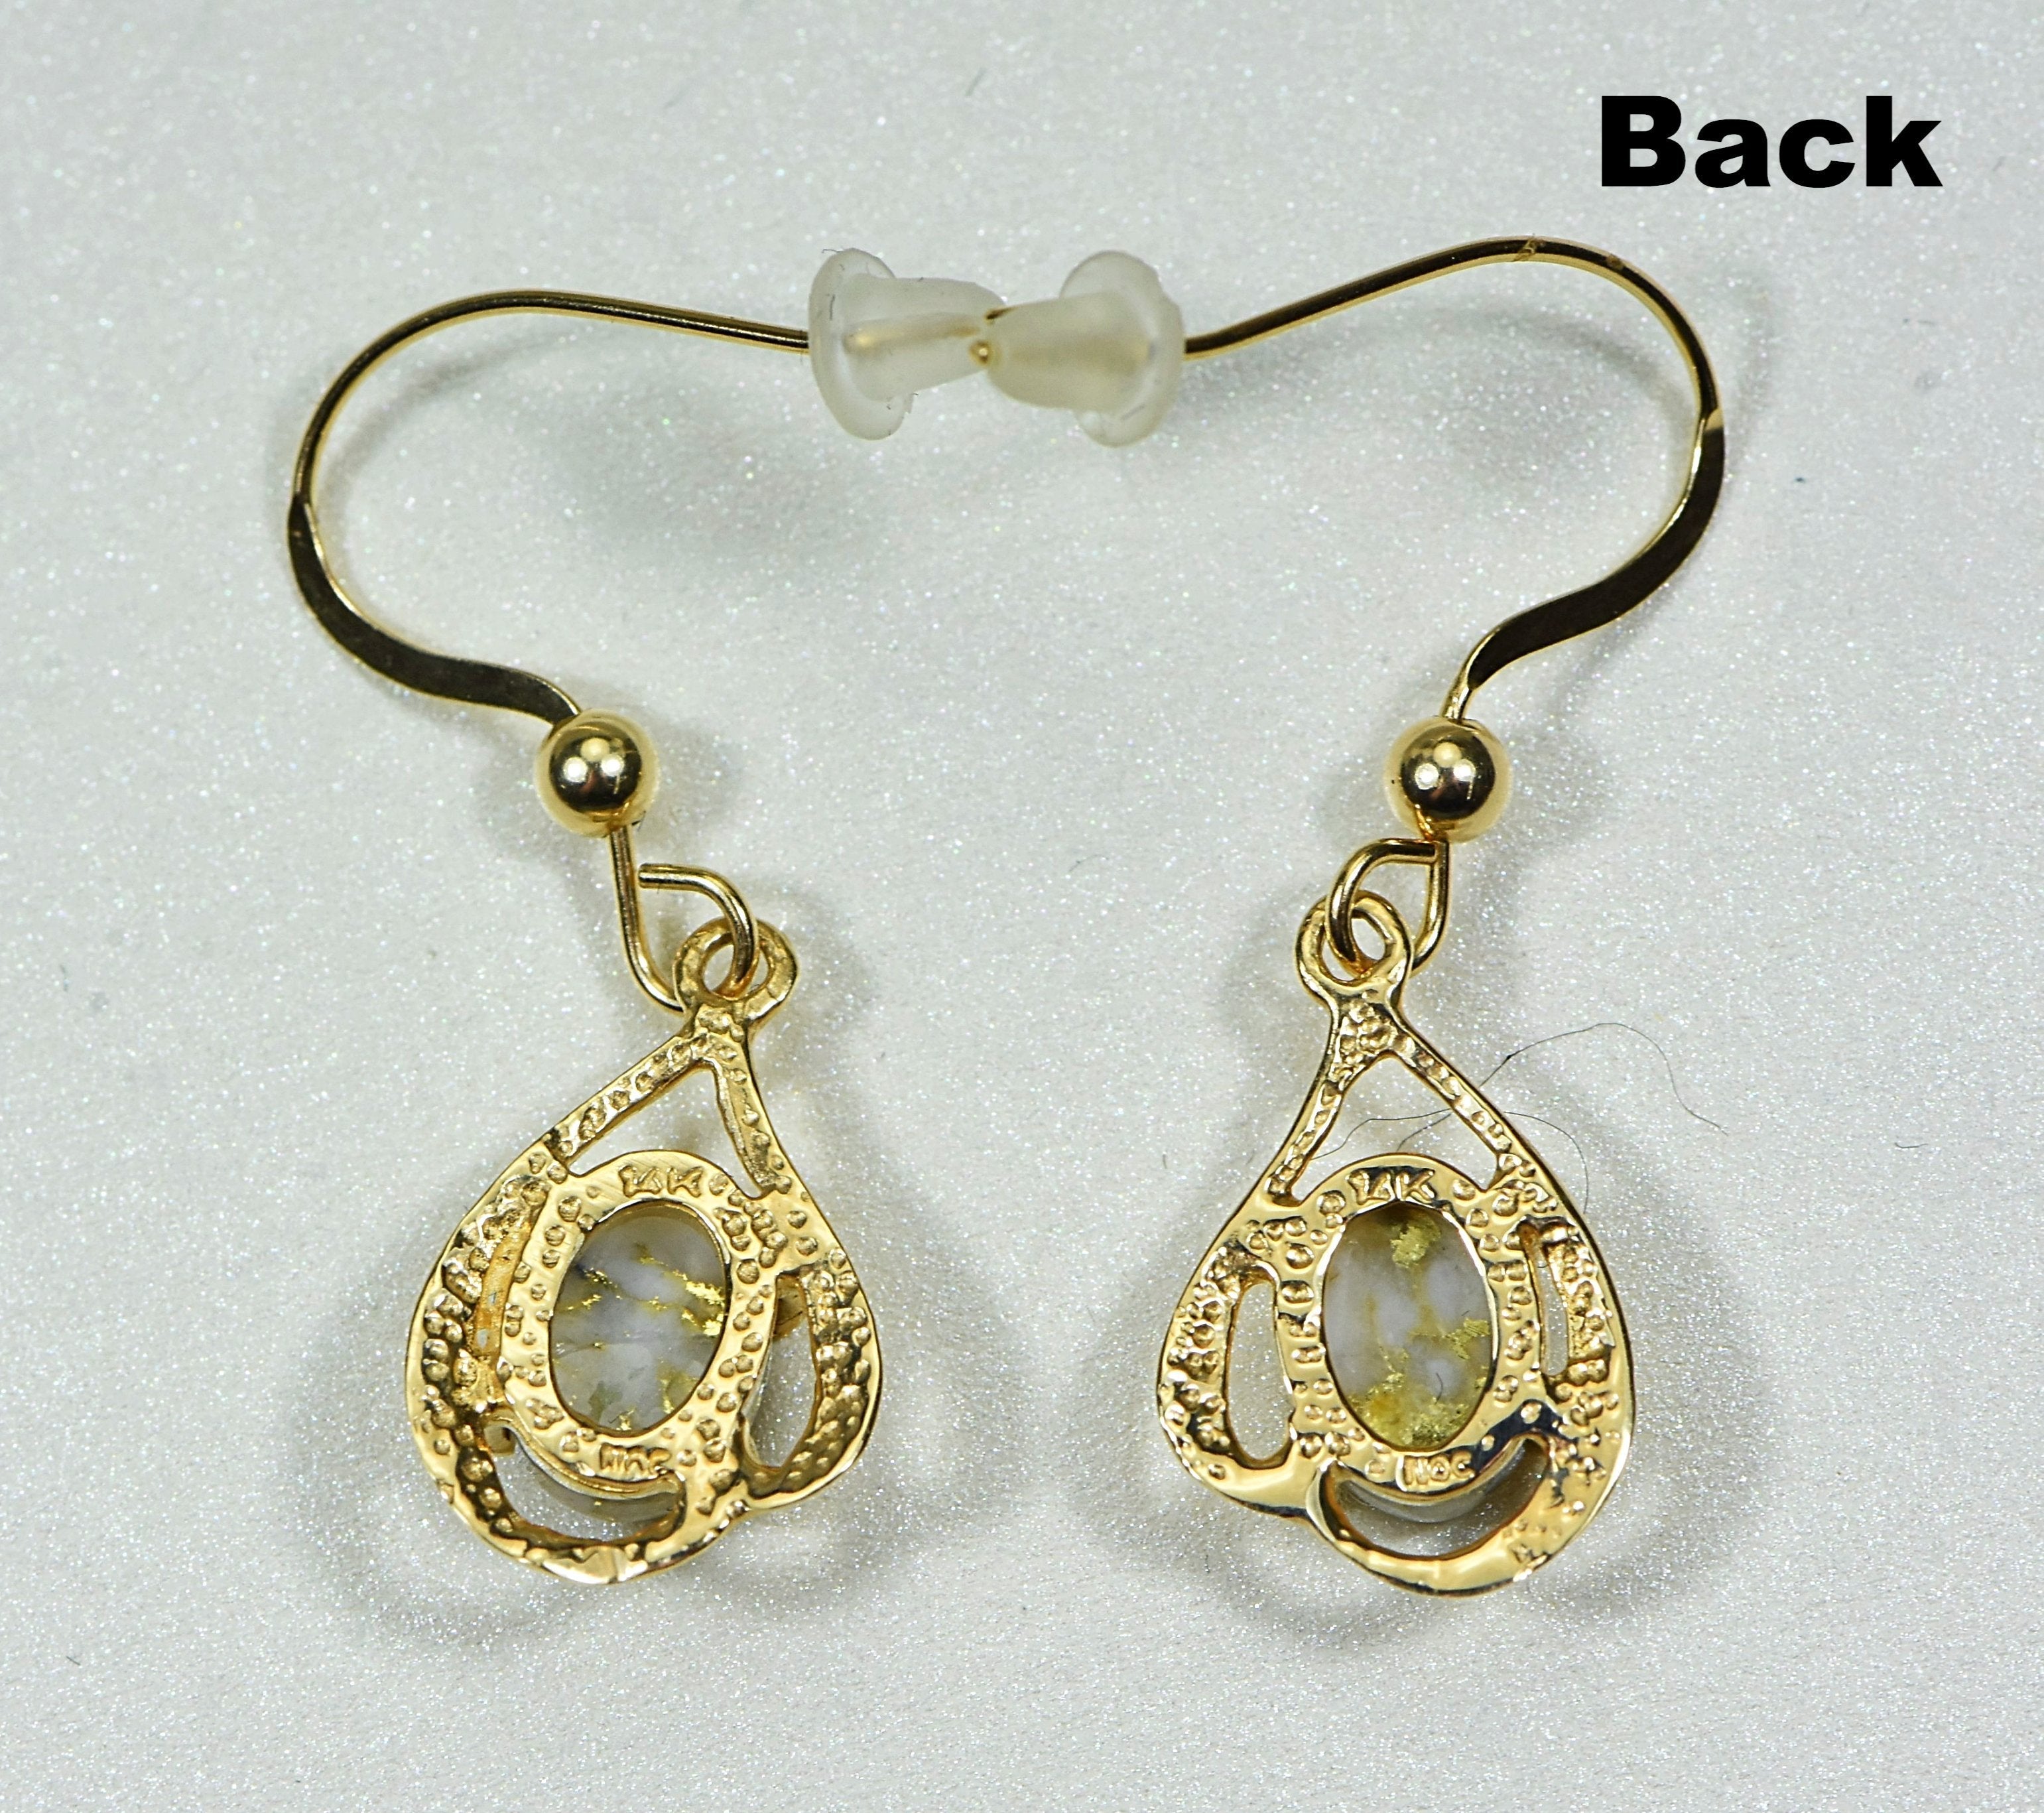 Gold Quartz Earrings "Orocal" EN870SMQ/LB Genuine Hand Crafted Jewelry - 14K Gold Casting